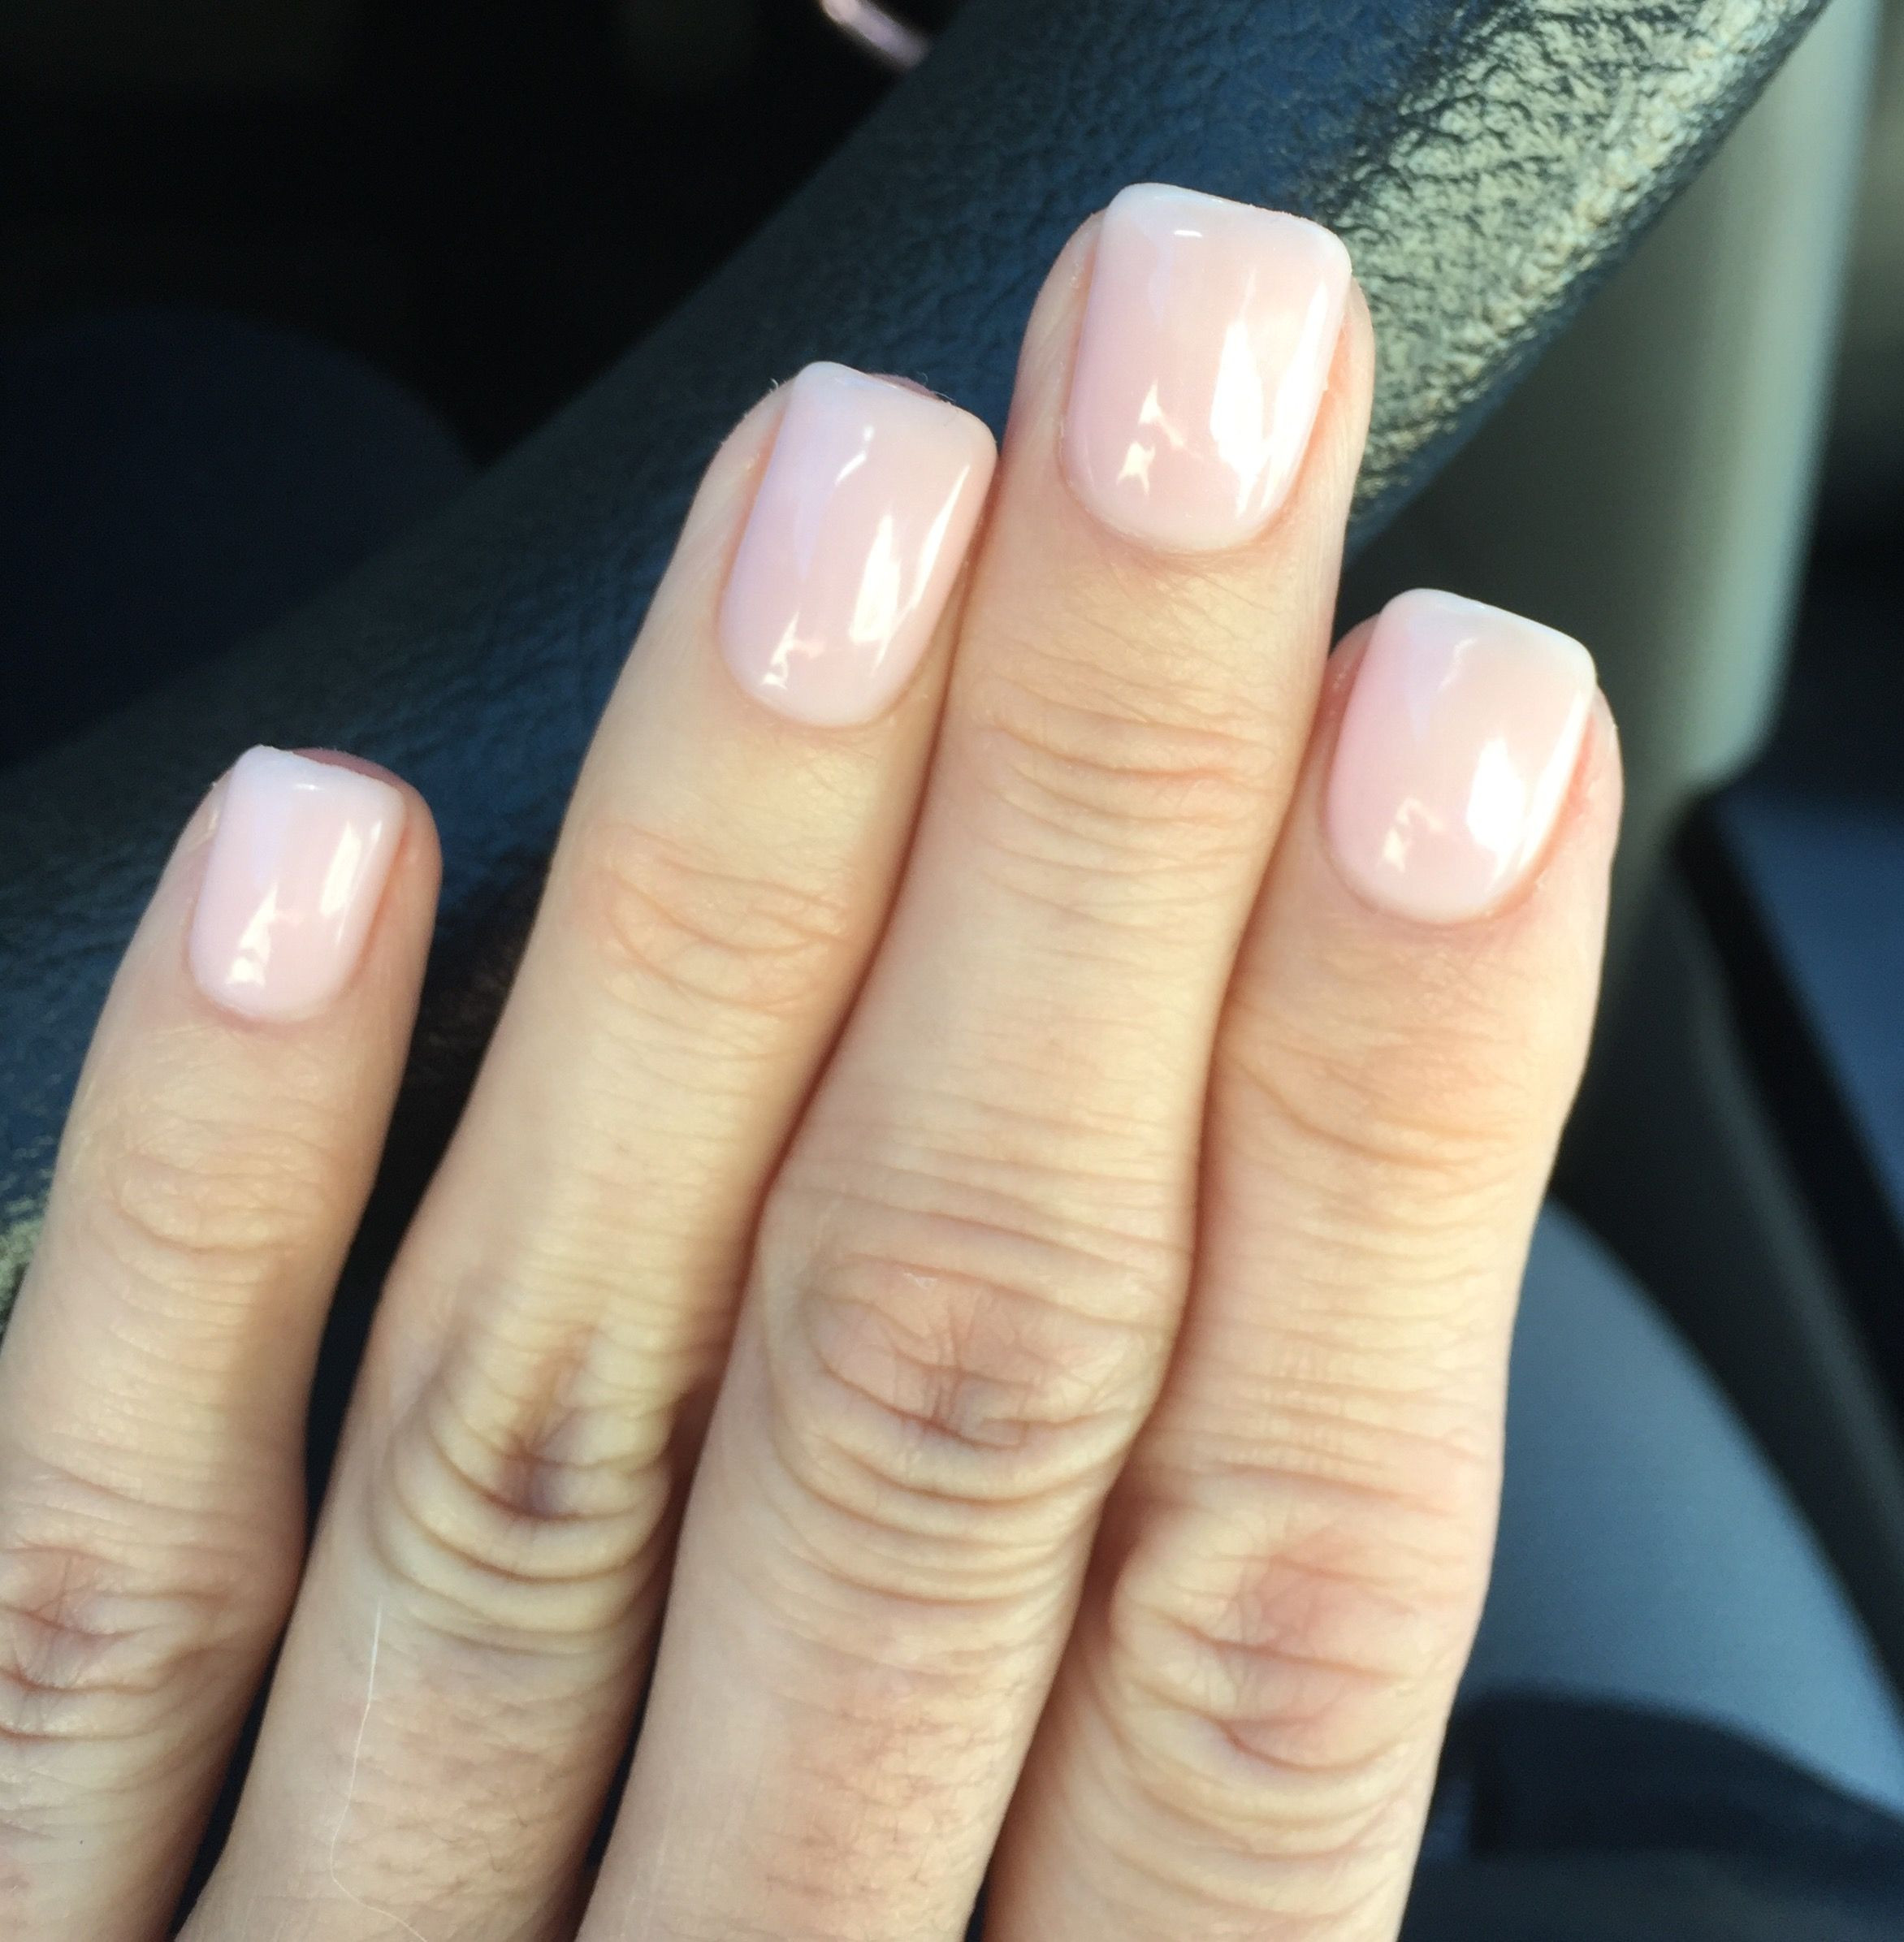 Opi Shellac Nail Colors
 LOVE this Two Coats of OPI GelColor "Bubble Bath" & one